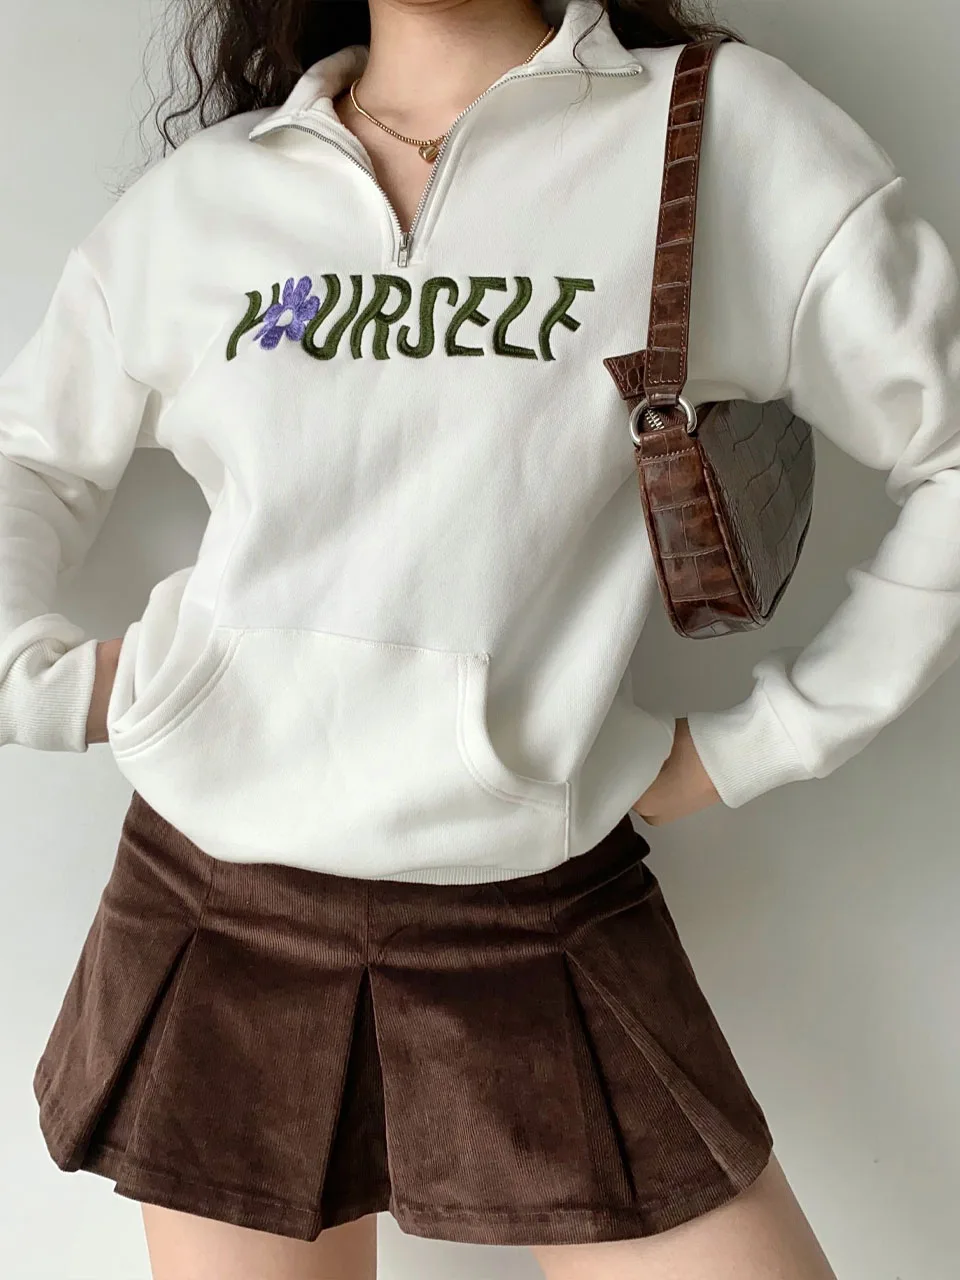 

Vintage letter Embroid Sweatshirts Women Autumn 2022 Harajuku Casual Long Sleeve Letters Print Oversized Hoodies Pullovers Tops